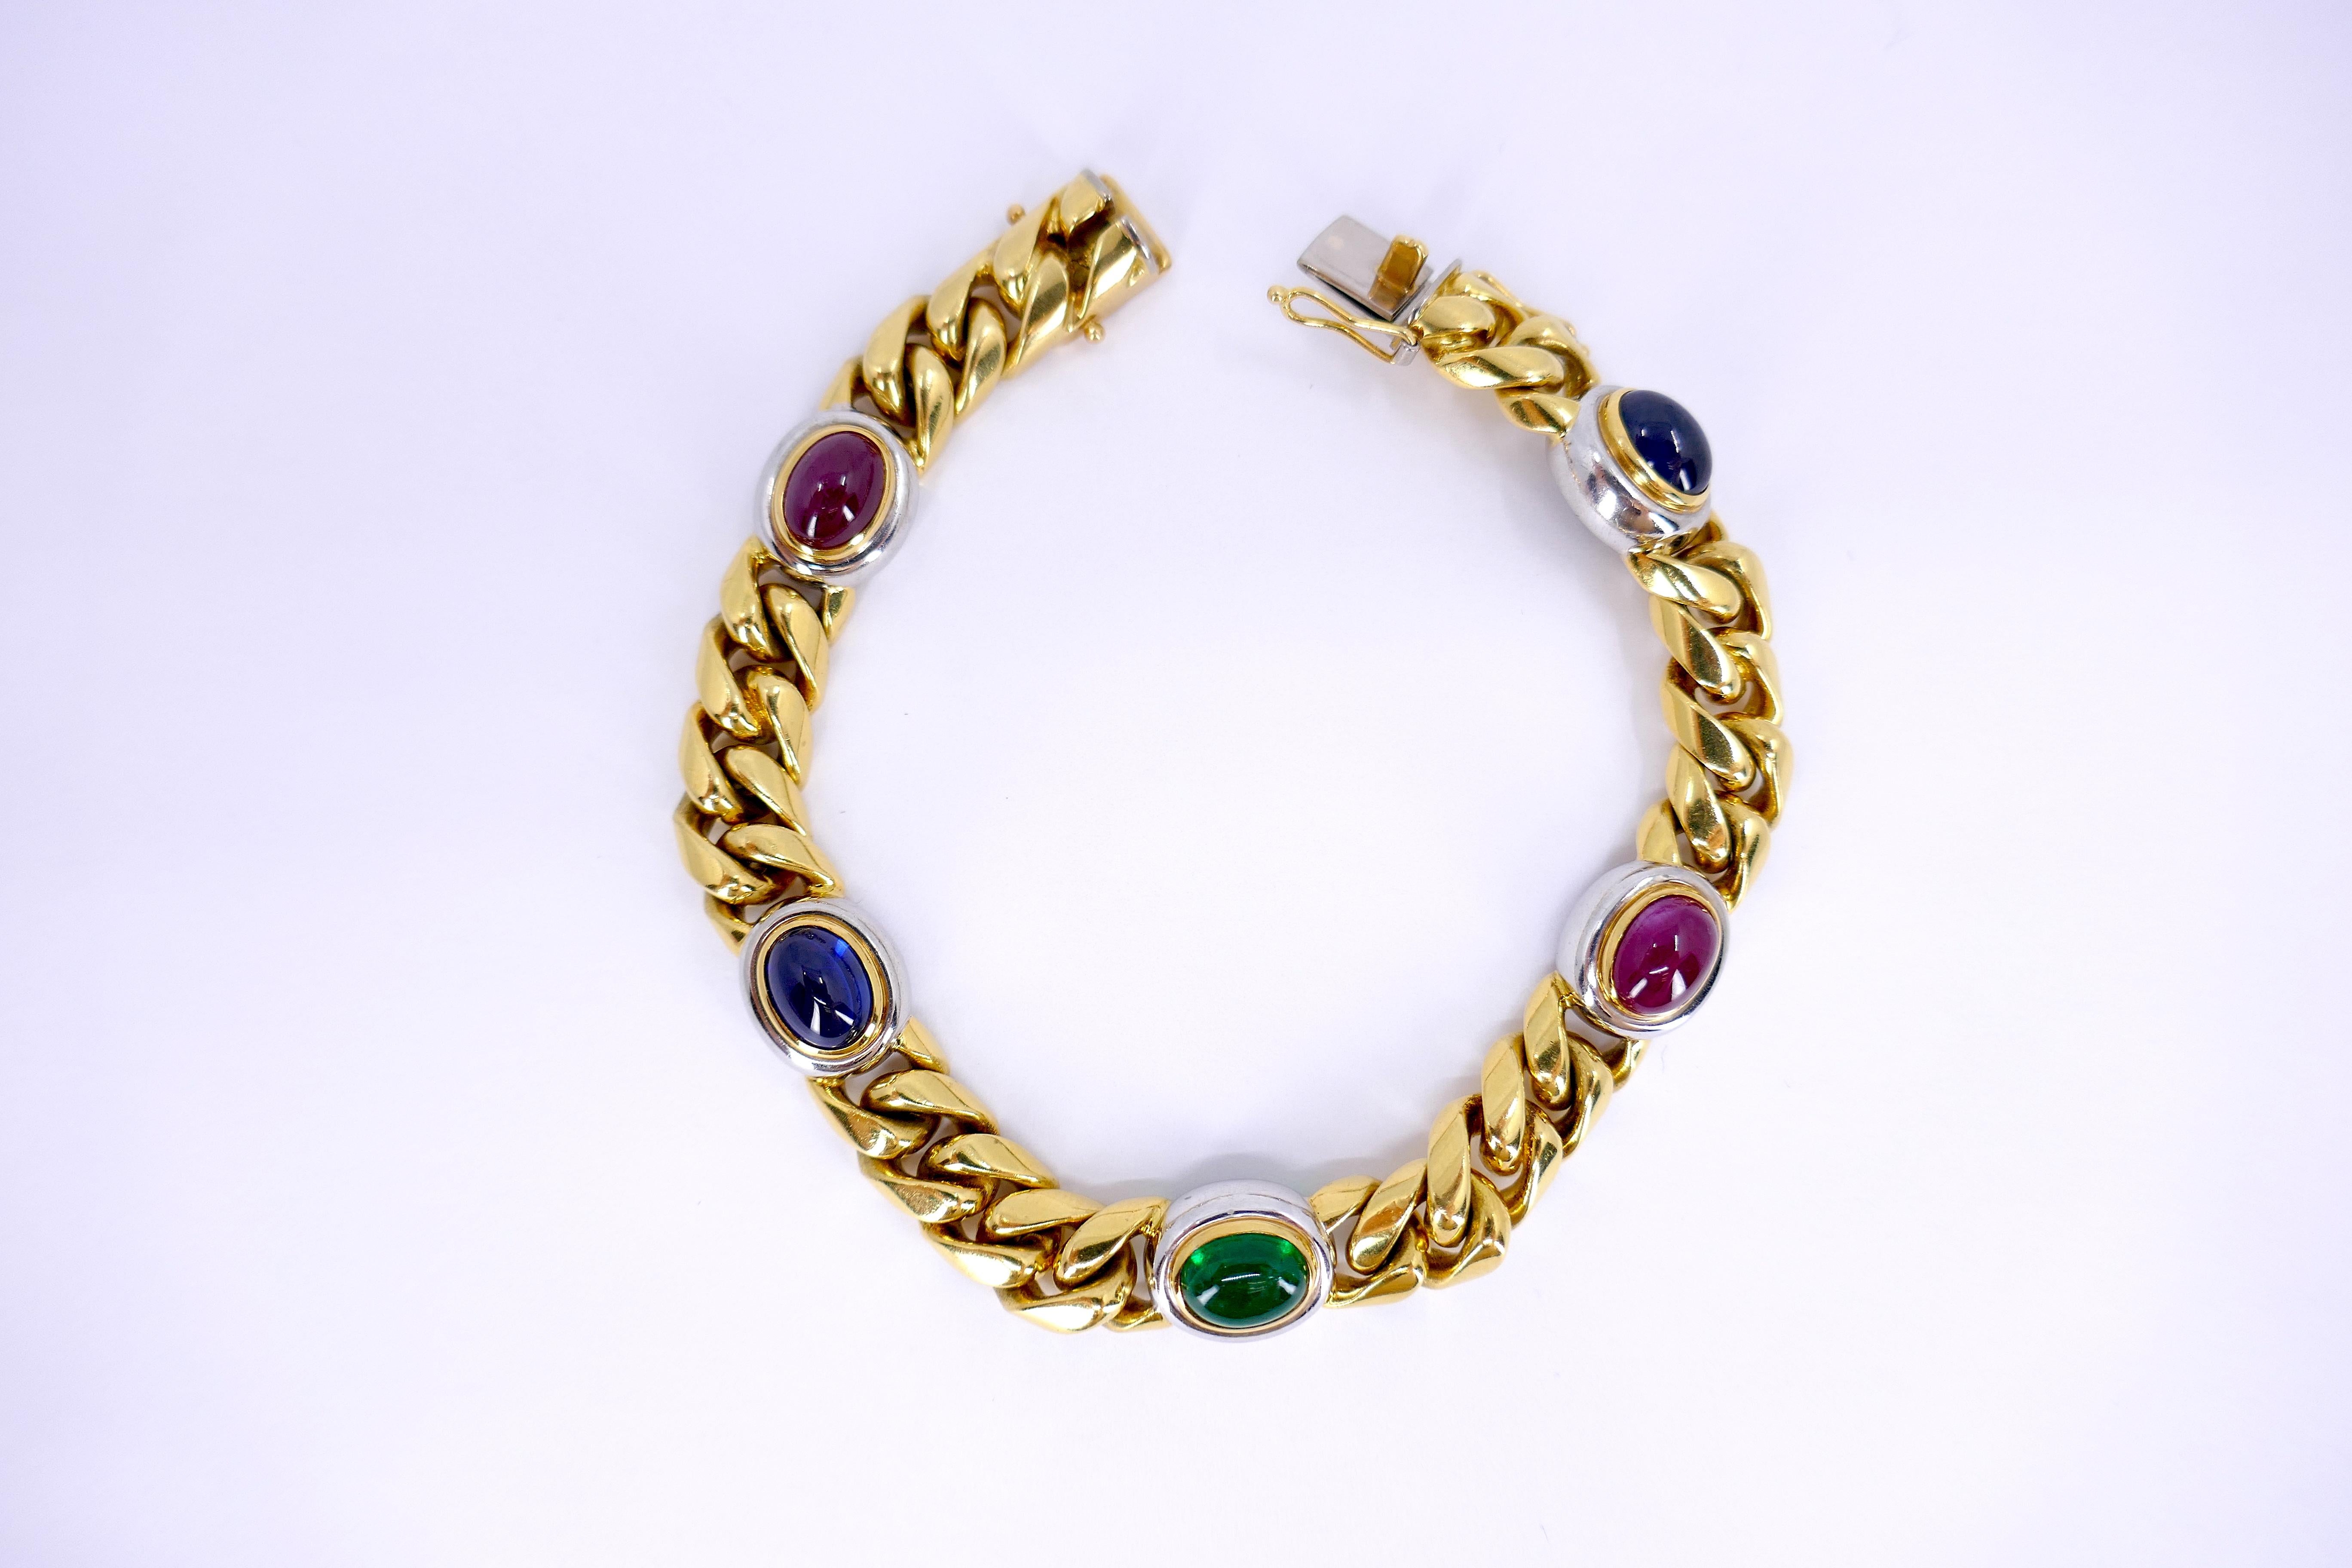 This Bvlgari two-tone gold bracelet, crafted in the 1980s, embodies the brand's signature blend of elegance and luxury. Made from 18K white and yellow gold, it offers a beautiful combination of metals. Weighing 56.1 grams, the bracelet is both